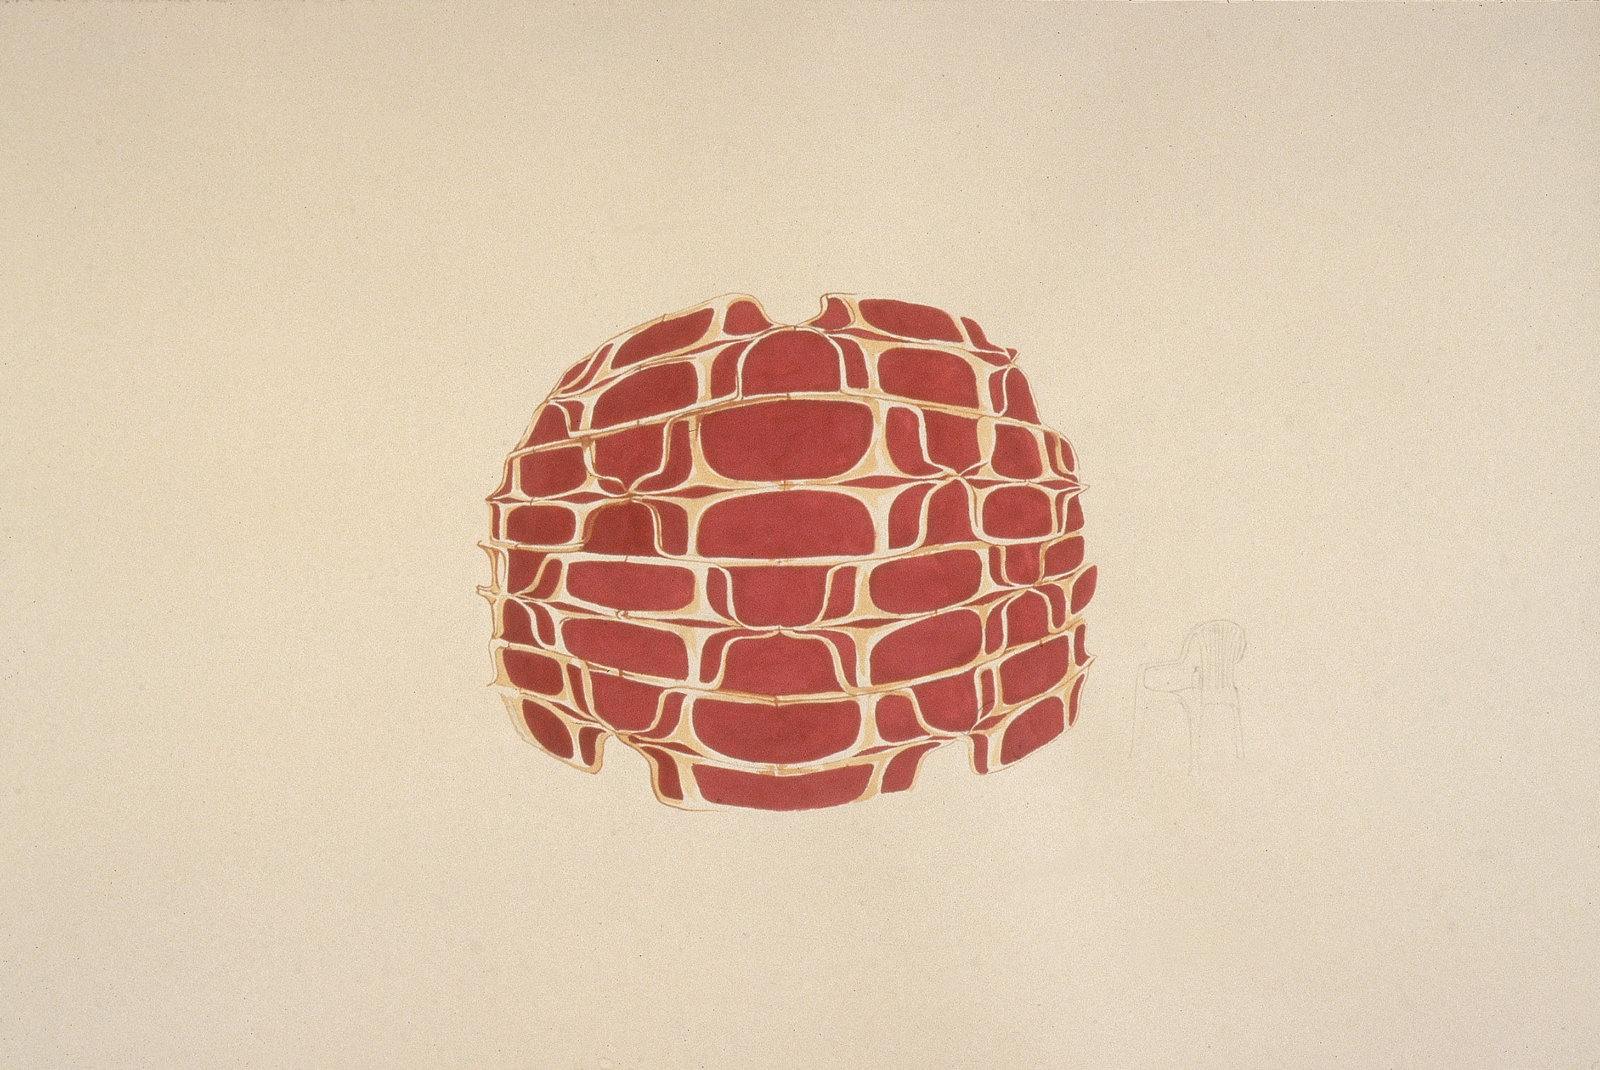 Brian Jungen, Bush Capsule Study, 2000, graphite and ink on paper, 40 x 52 in. (102 x 132 cm)